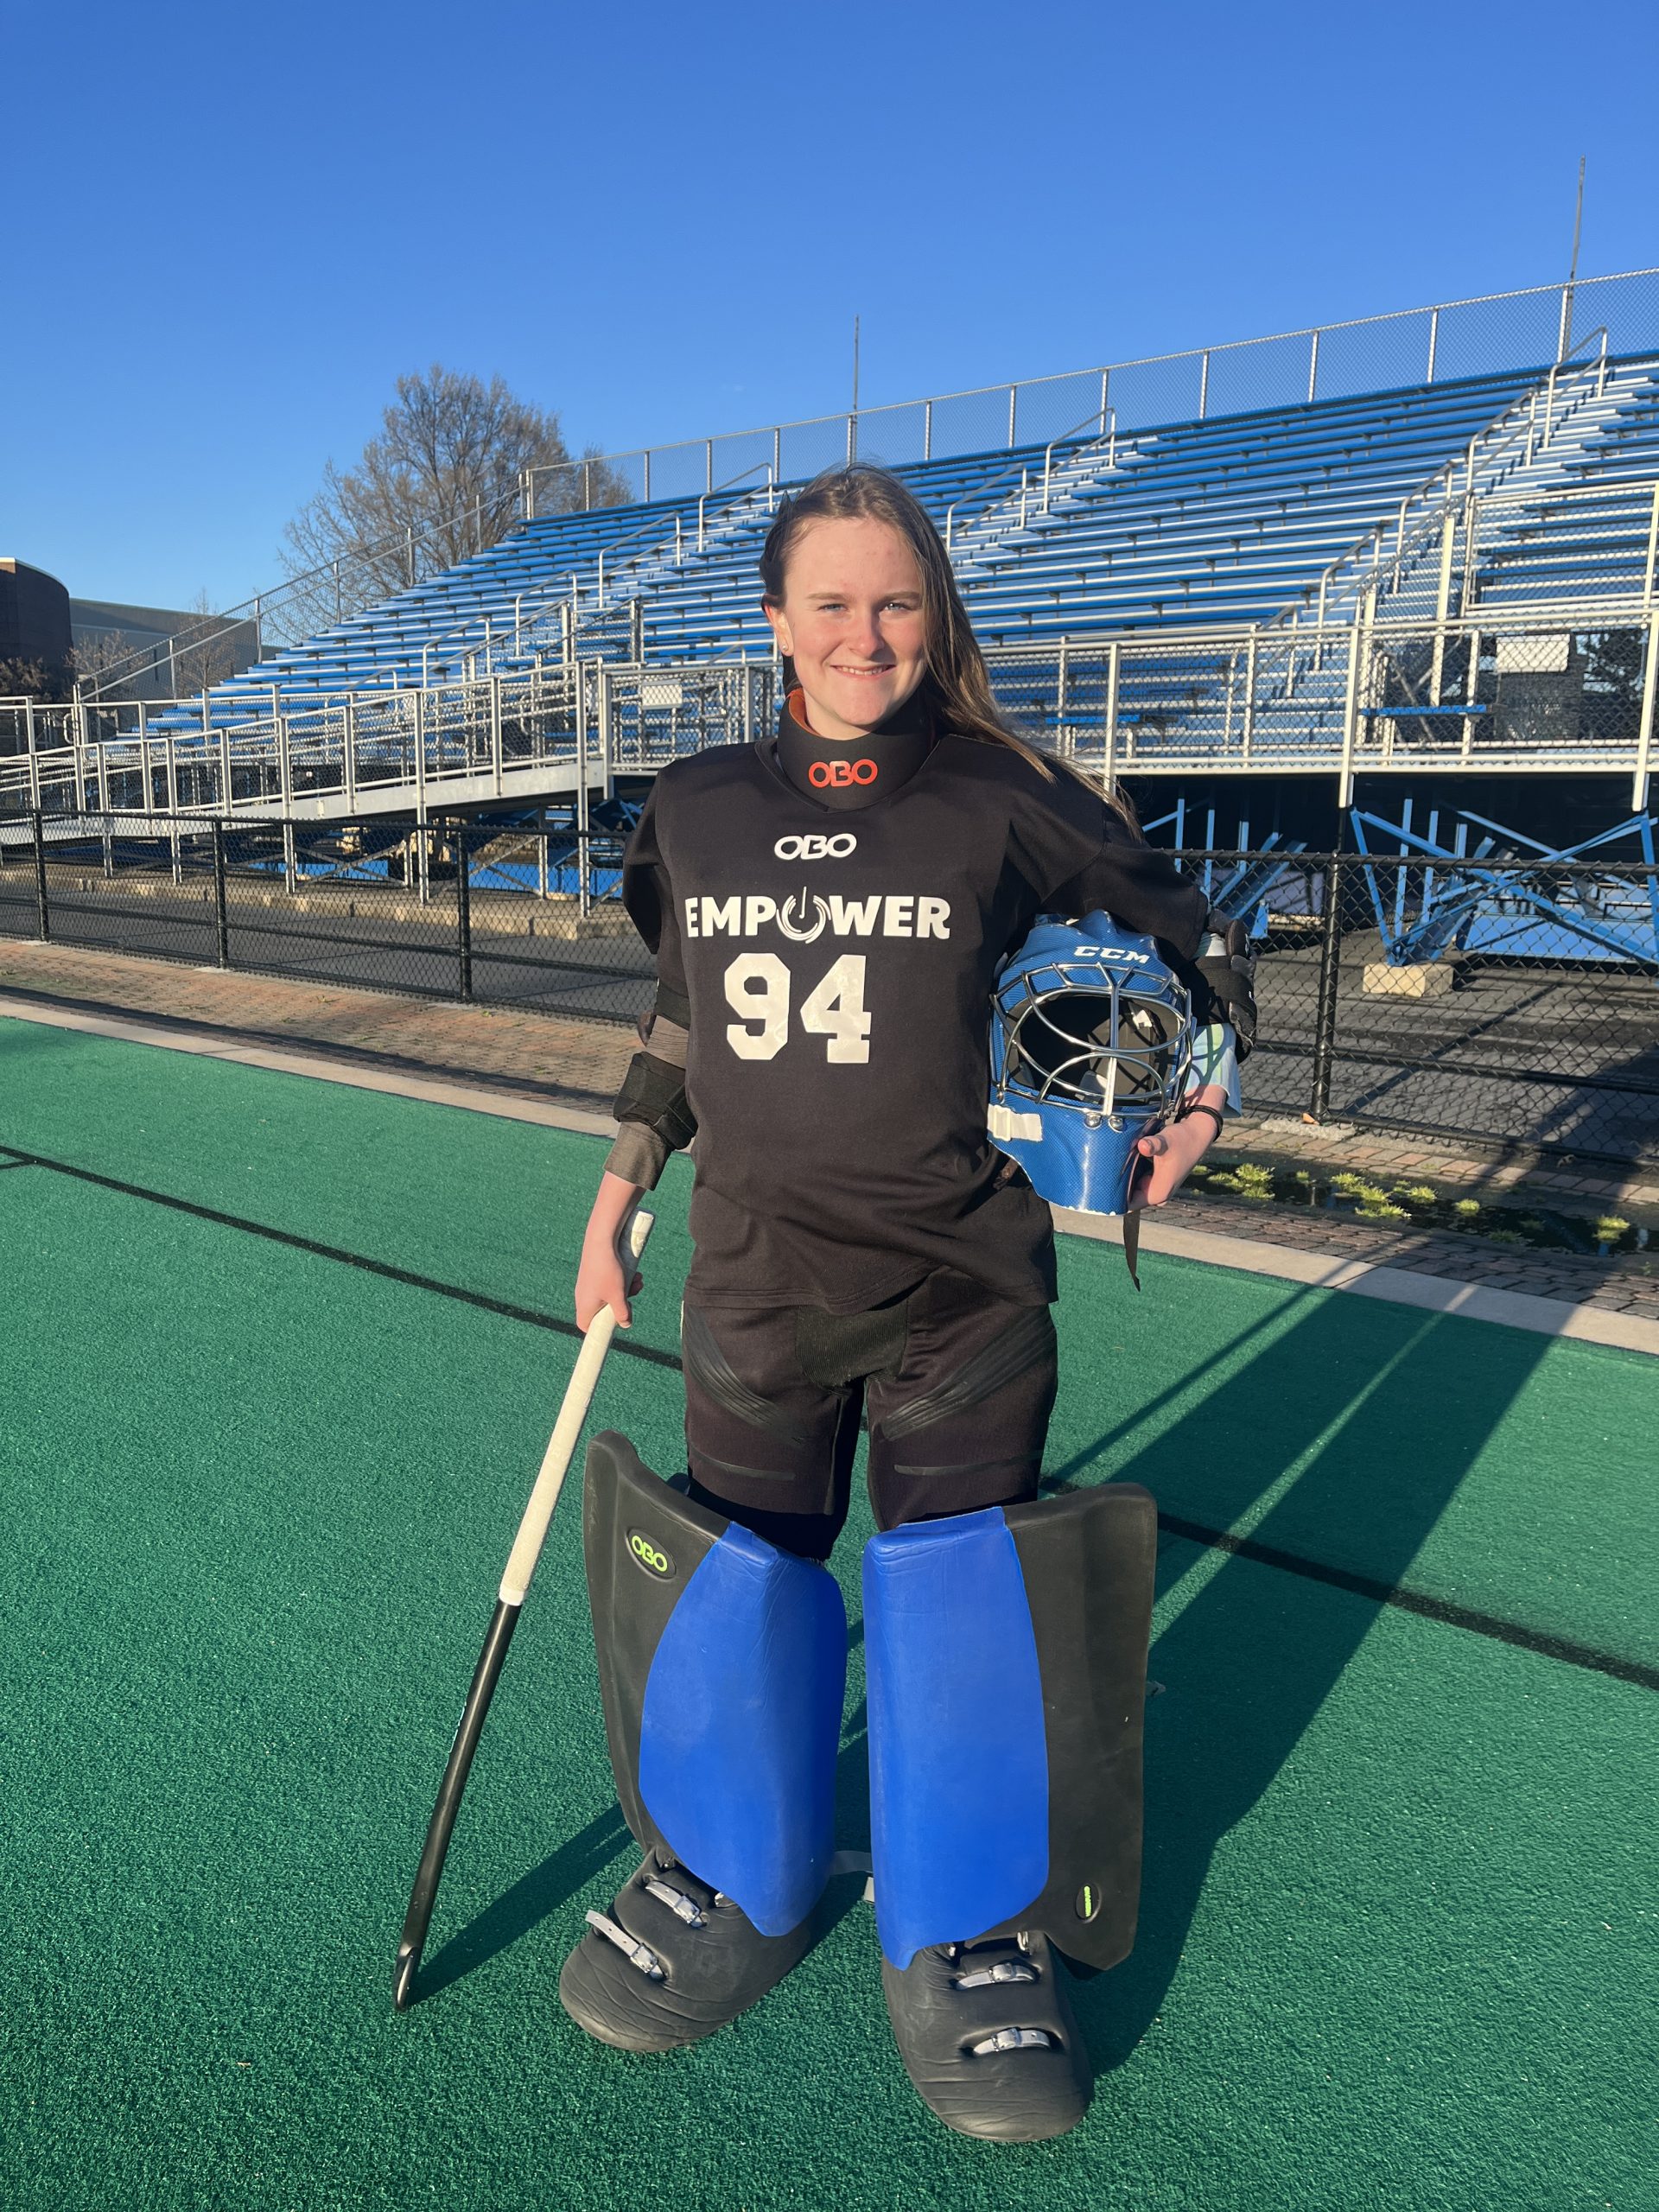 Nora O'Connell field hockey goalie number 94 empower field hockey